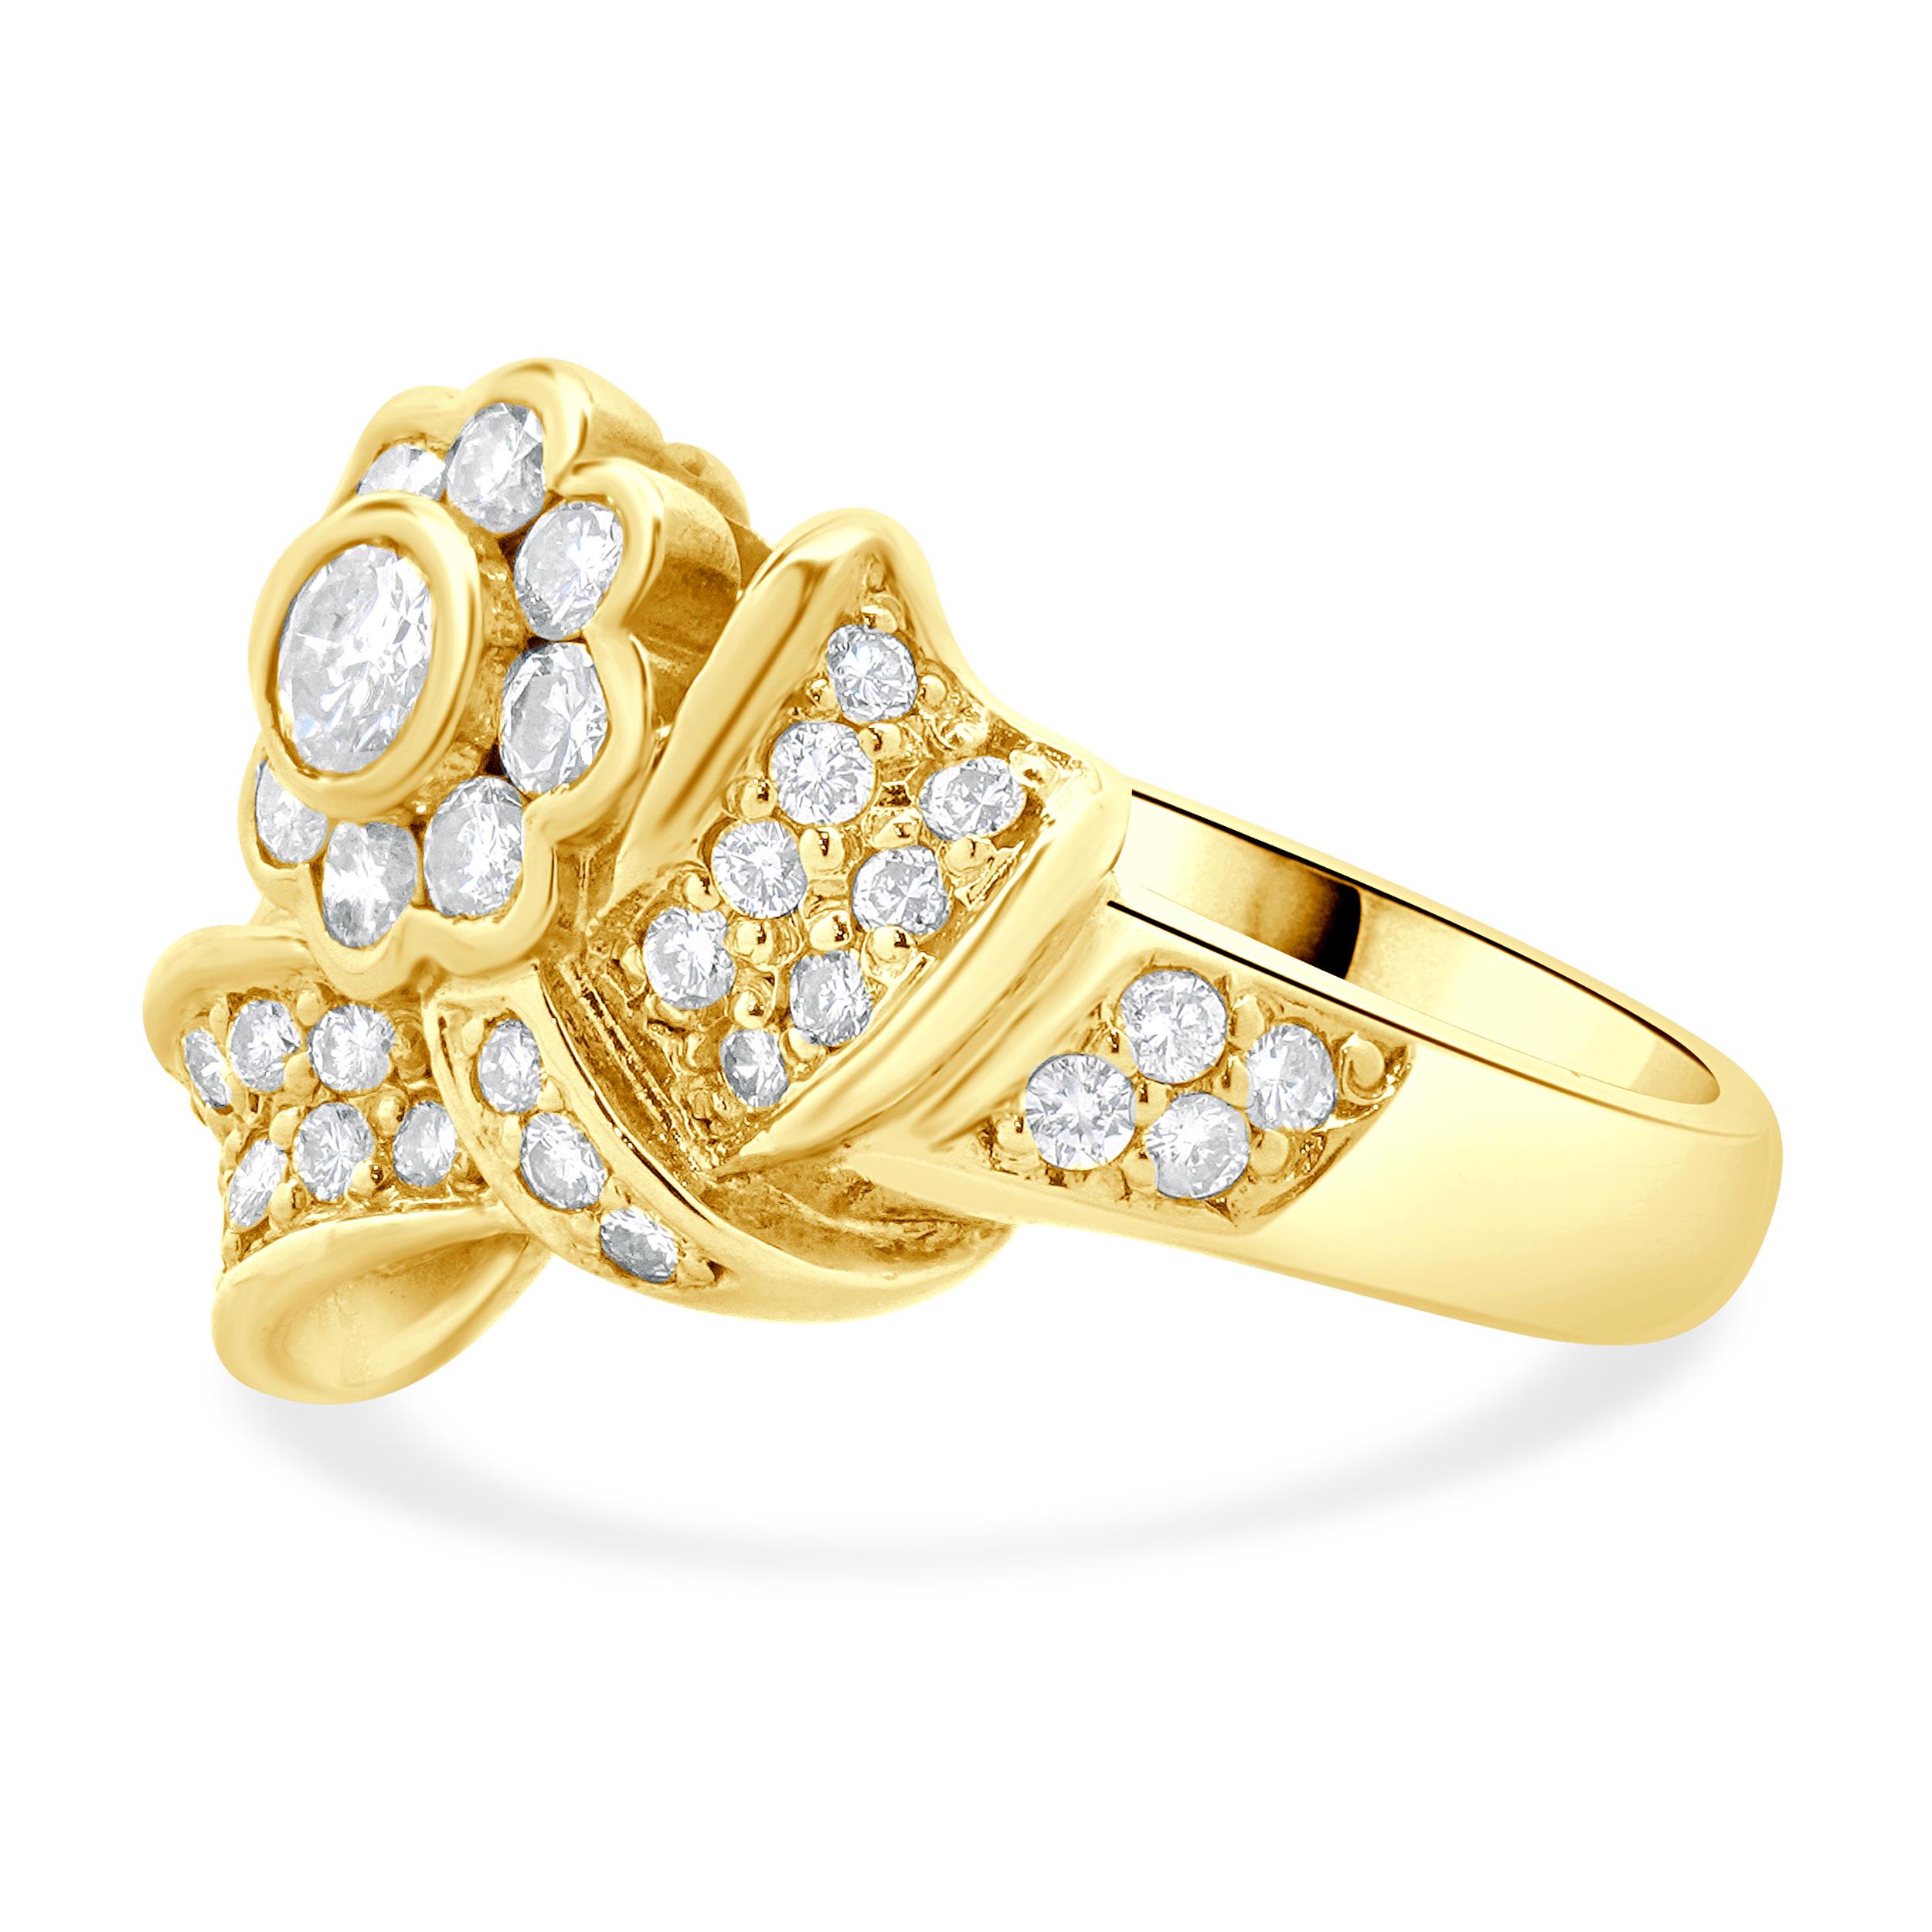 Designer: custom
Material: 18K yellow gold
Diamond: 36 round brilliant cut = 0.90cttw
Color: H
Clarity: SI2
Size: 8 sizing available 
Weight: 9.10 grams
